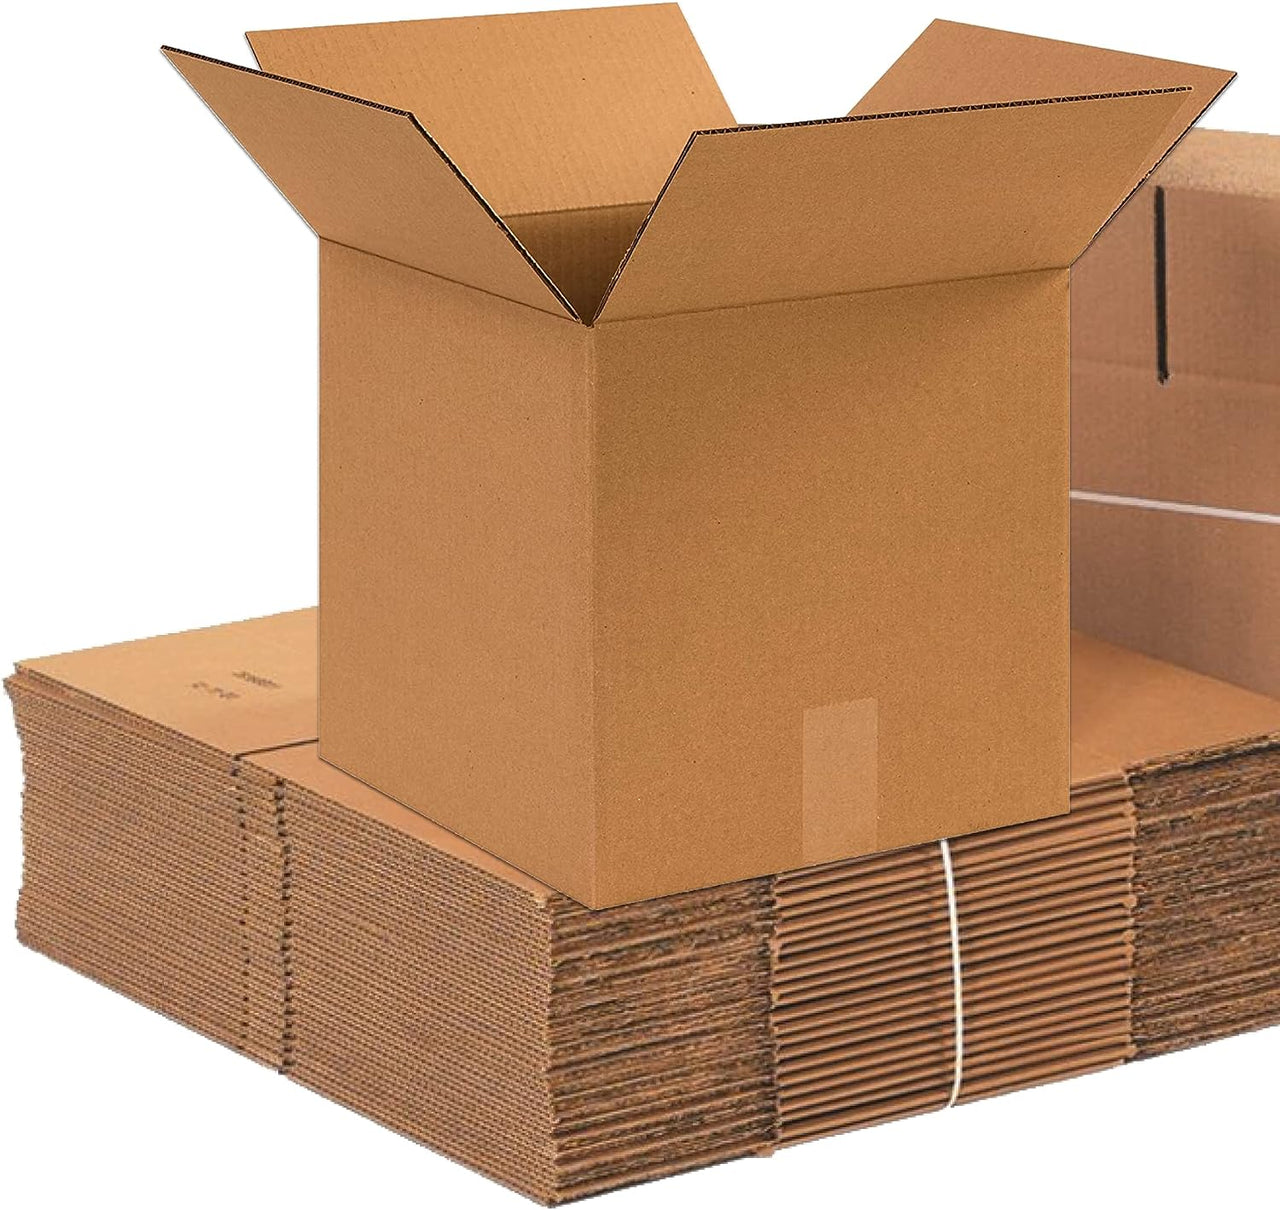 25 Pack Shipping Boxes 16"L x 16"W x 16"H Corrugated Cardboard Box for Packing Moving Storage